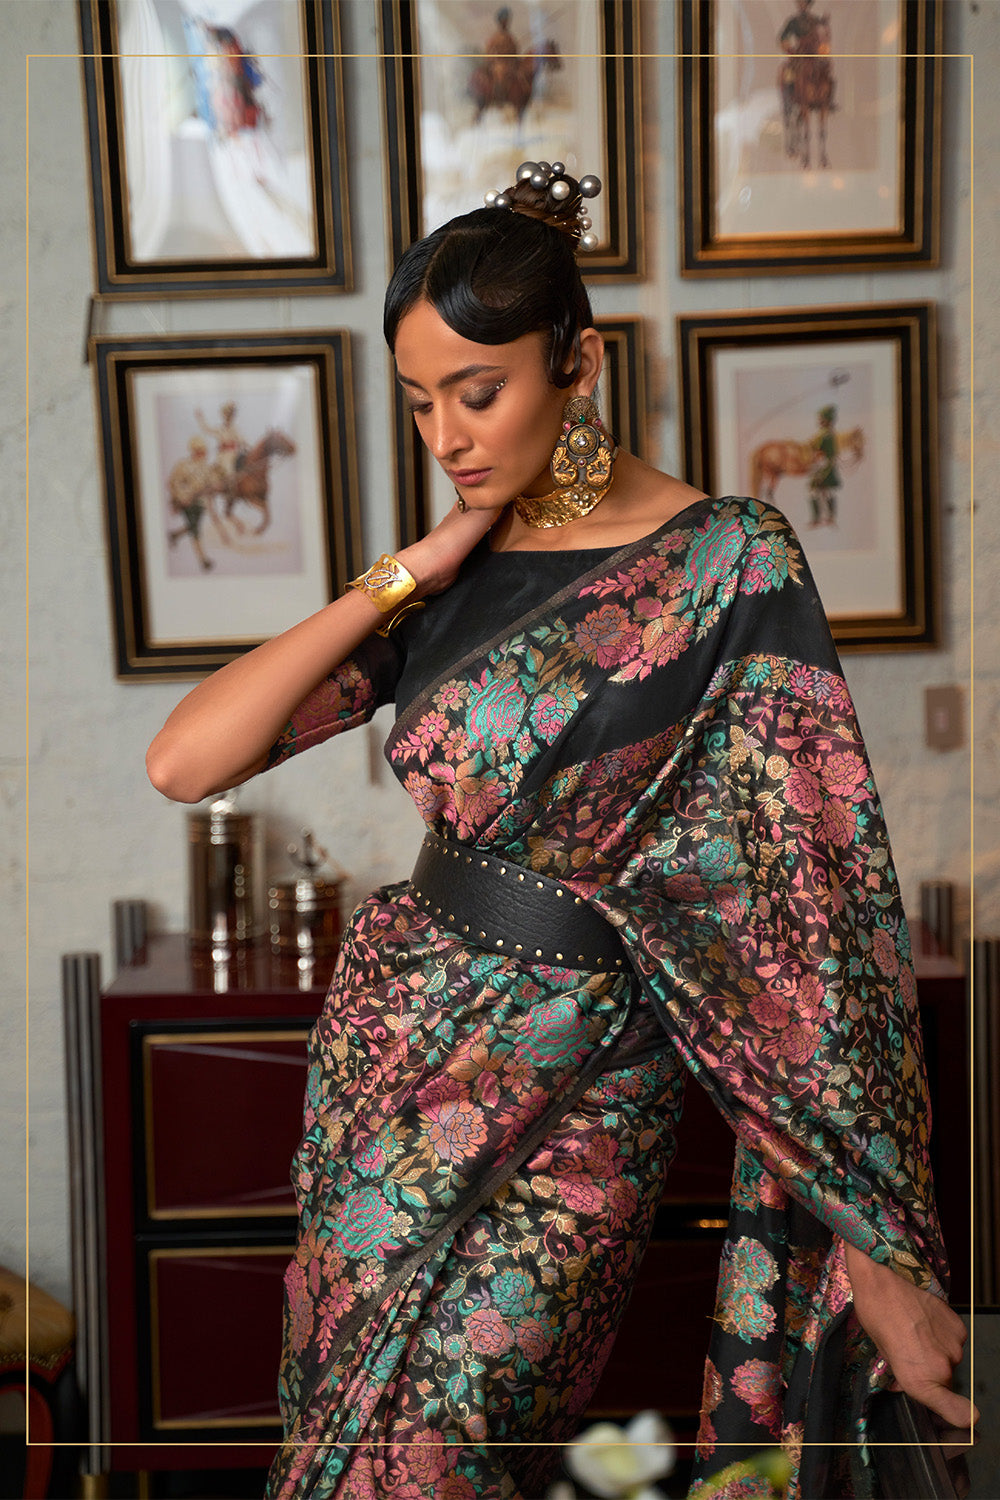 Ebony Black Woven Designer Kani Saree with Floral Weaving in Pallu and Border in Pure Modal Silk